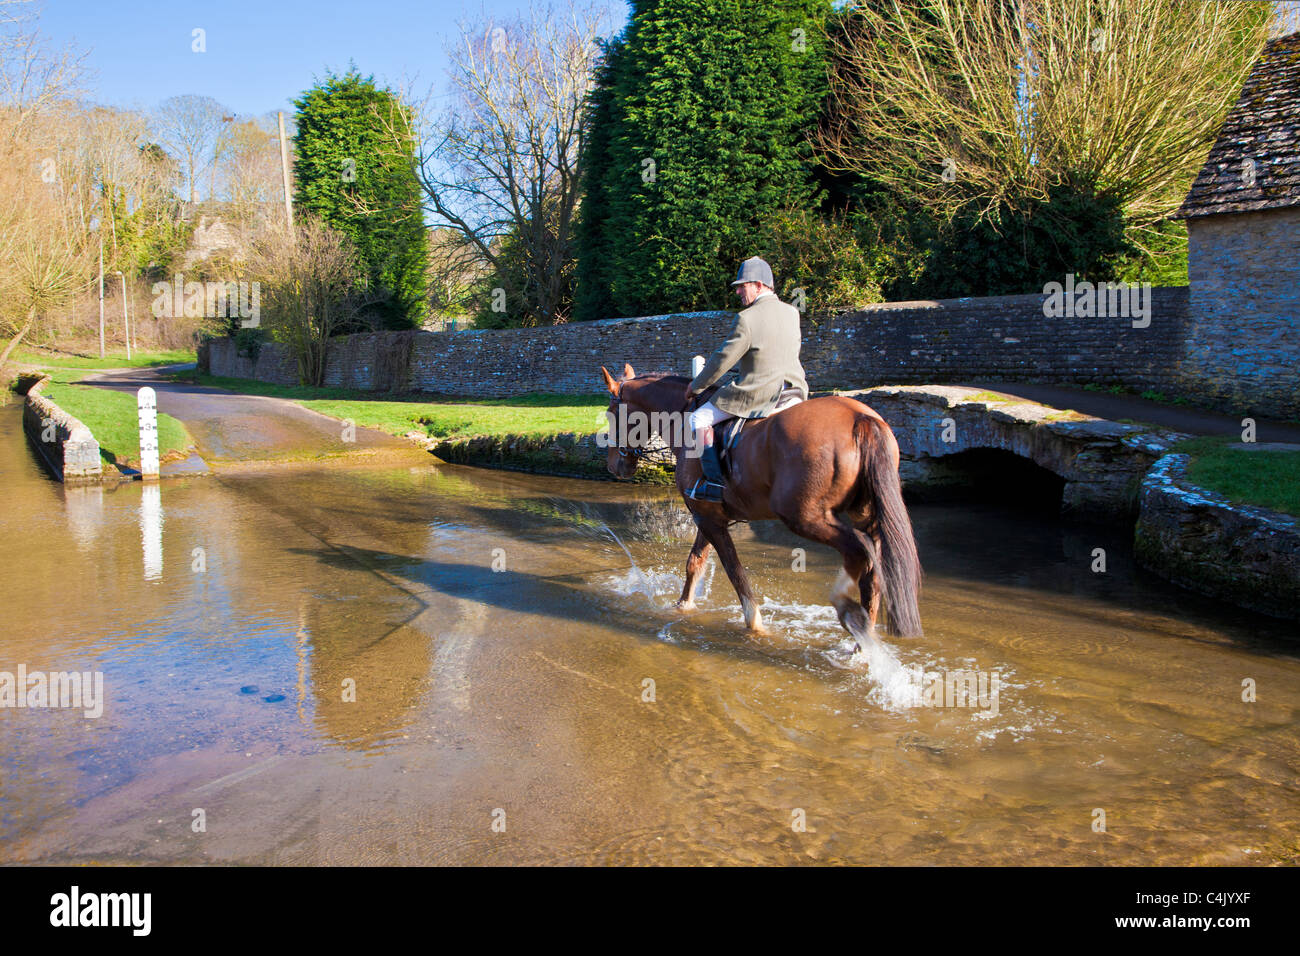 A horse and rider crossing ford in pretty Cotswold village of Shilton, Oxfordshire, England, UK on a sunny day in early spring Stock Photo